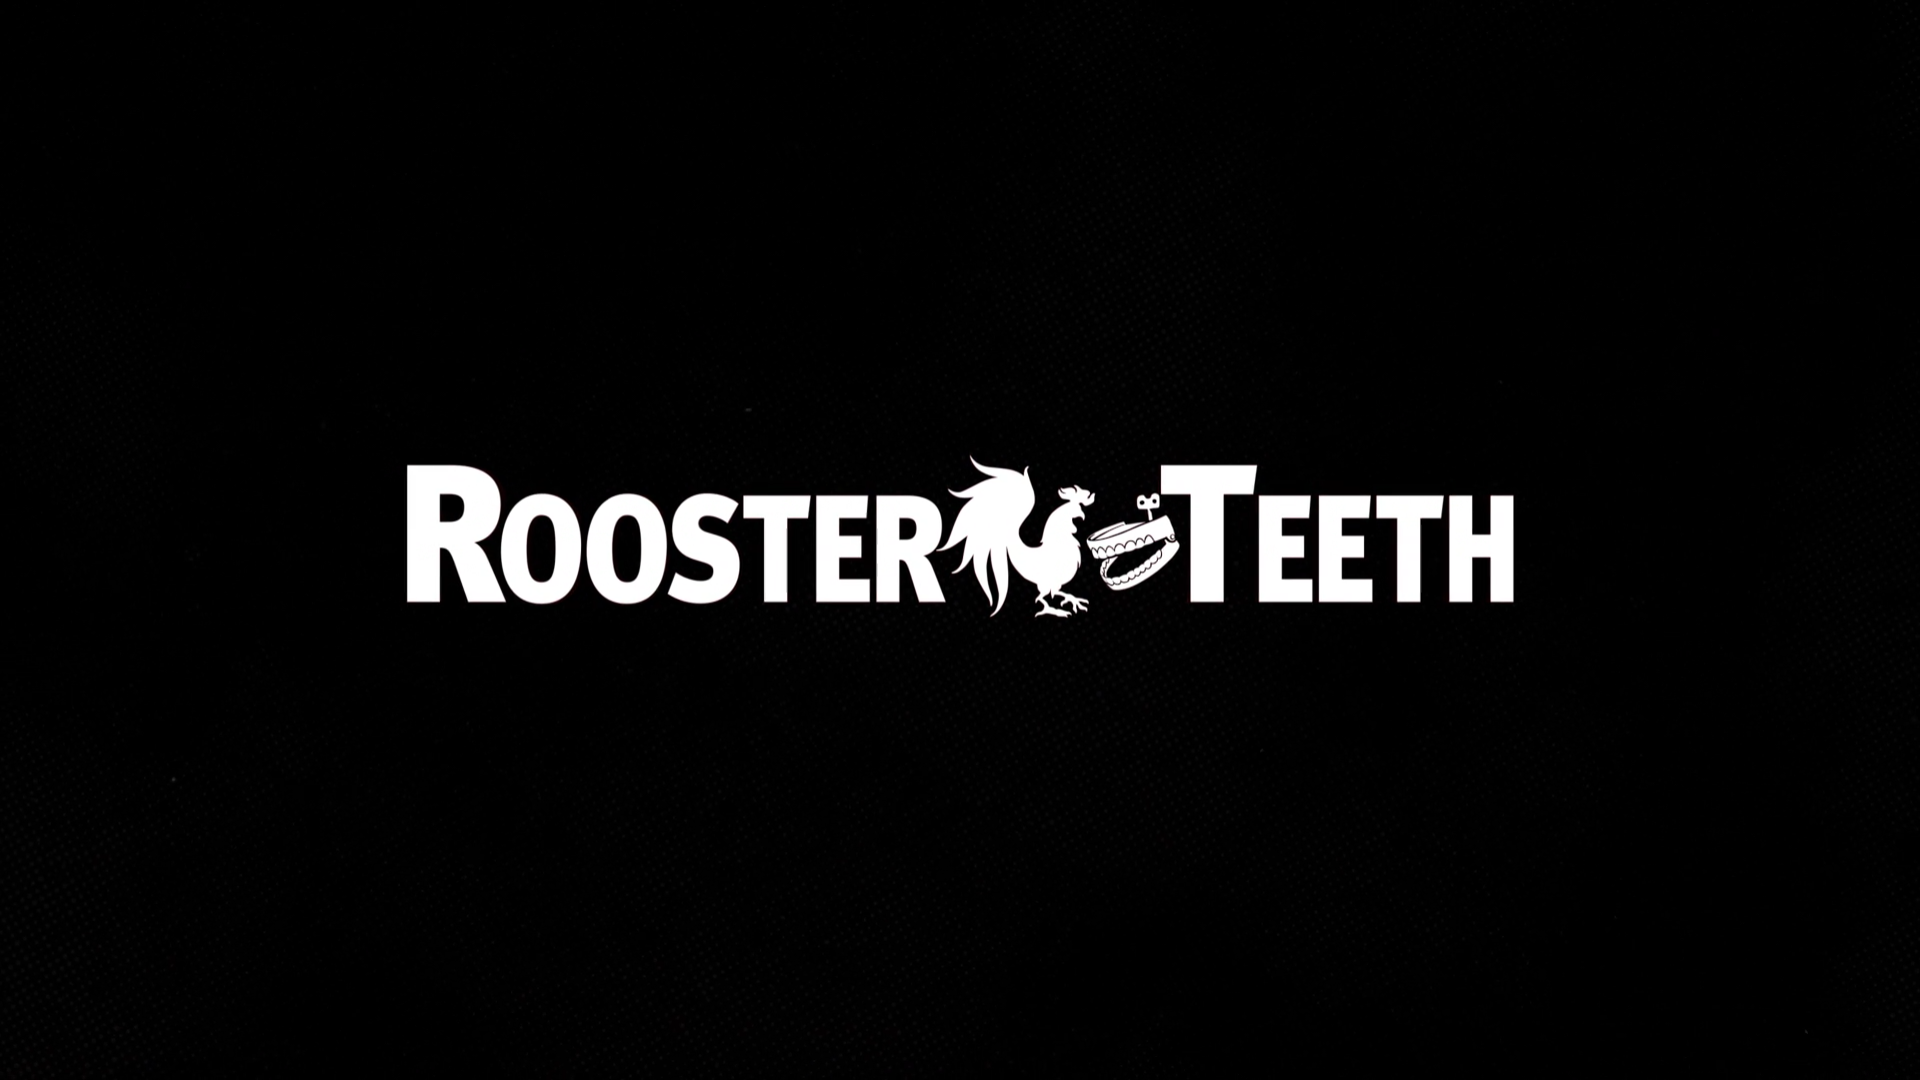 General 1920x1080 Rooster Teeth black Youtuber minimalism black background title logo simple background roosters animals company text